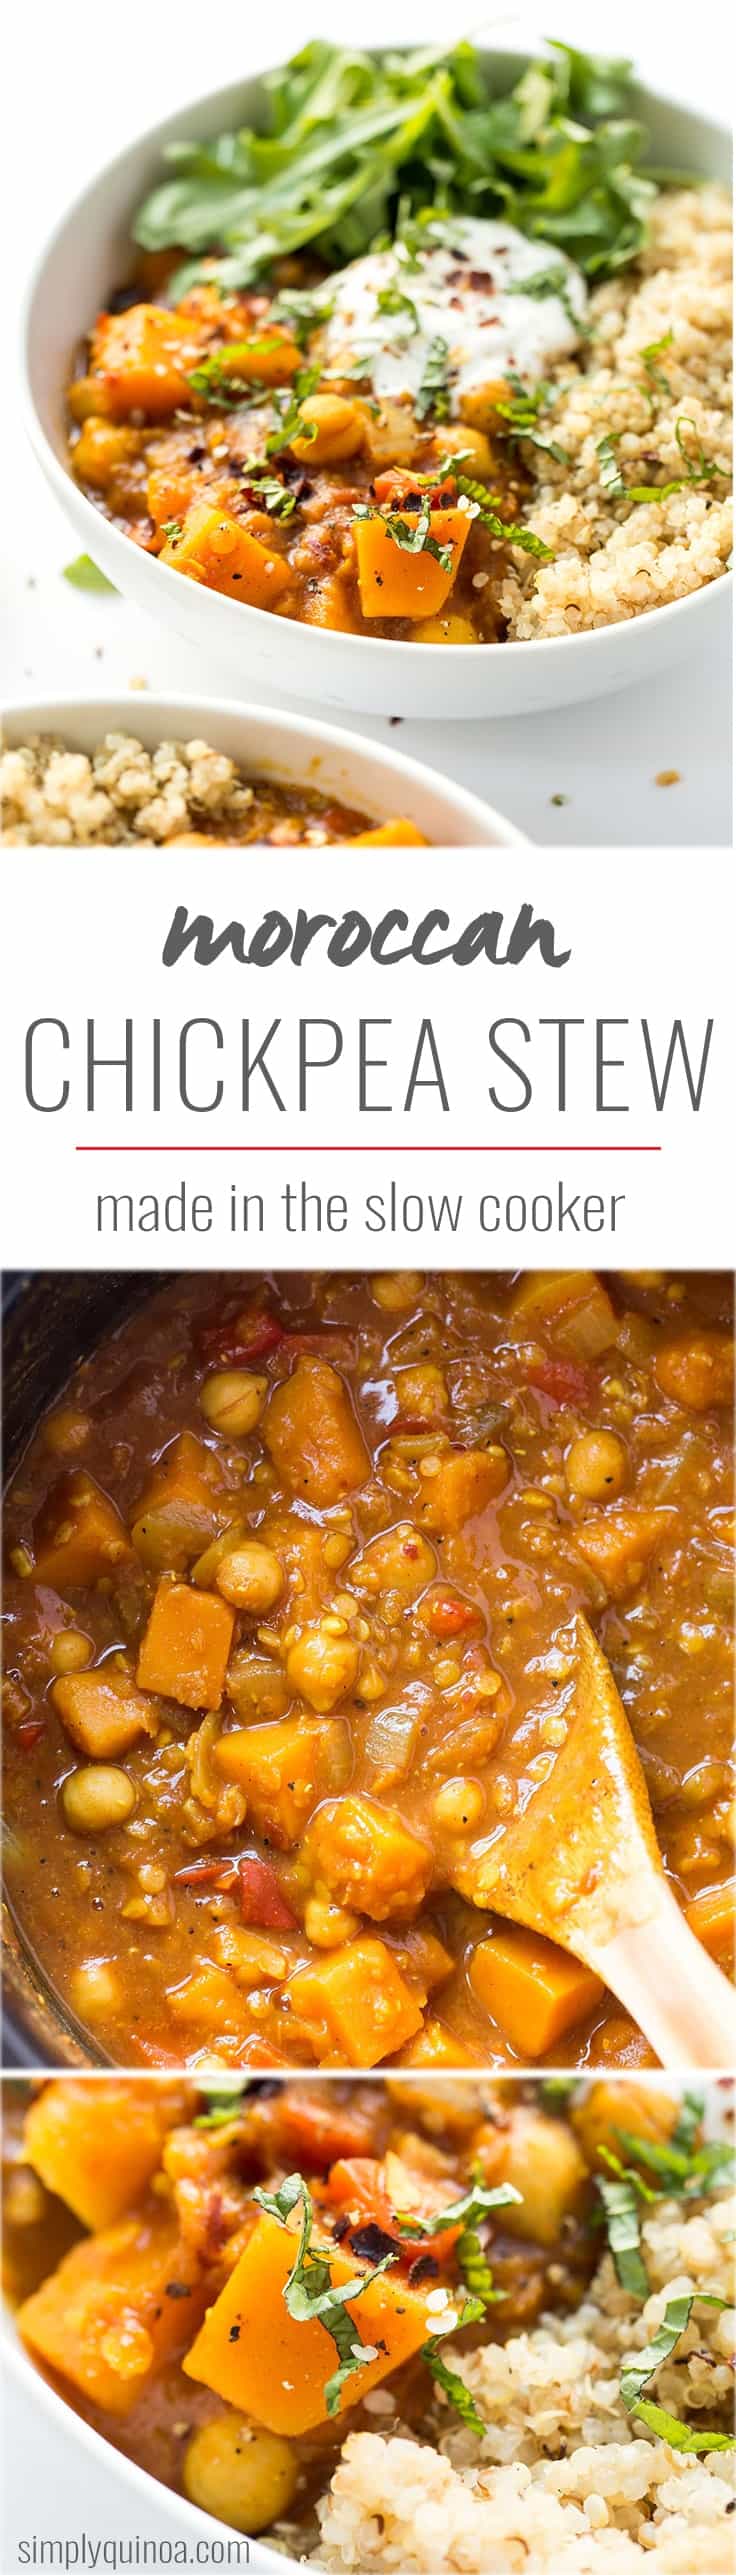 This slow cooker Moroccan Chickpea Stew is made with tons of aromatic spices, butternut squash and red lentils for a hearty, plant-based dinner!